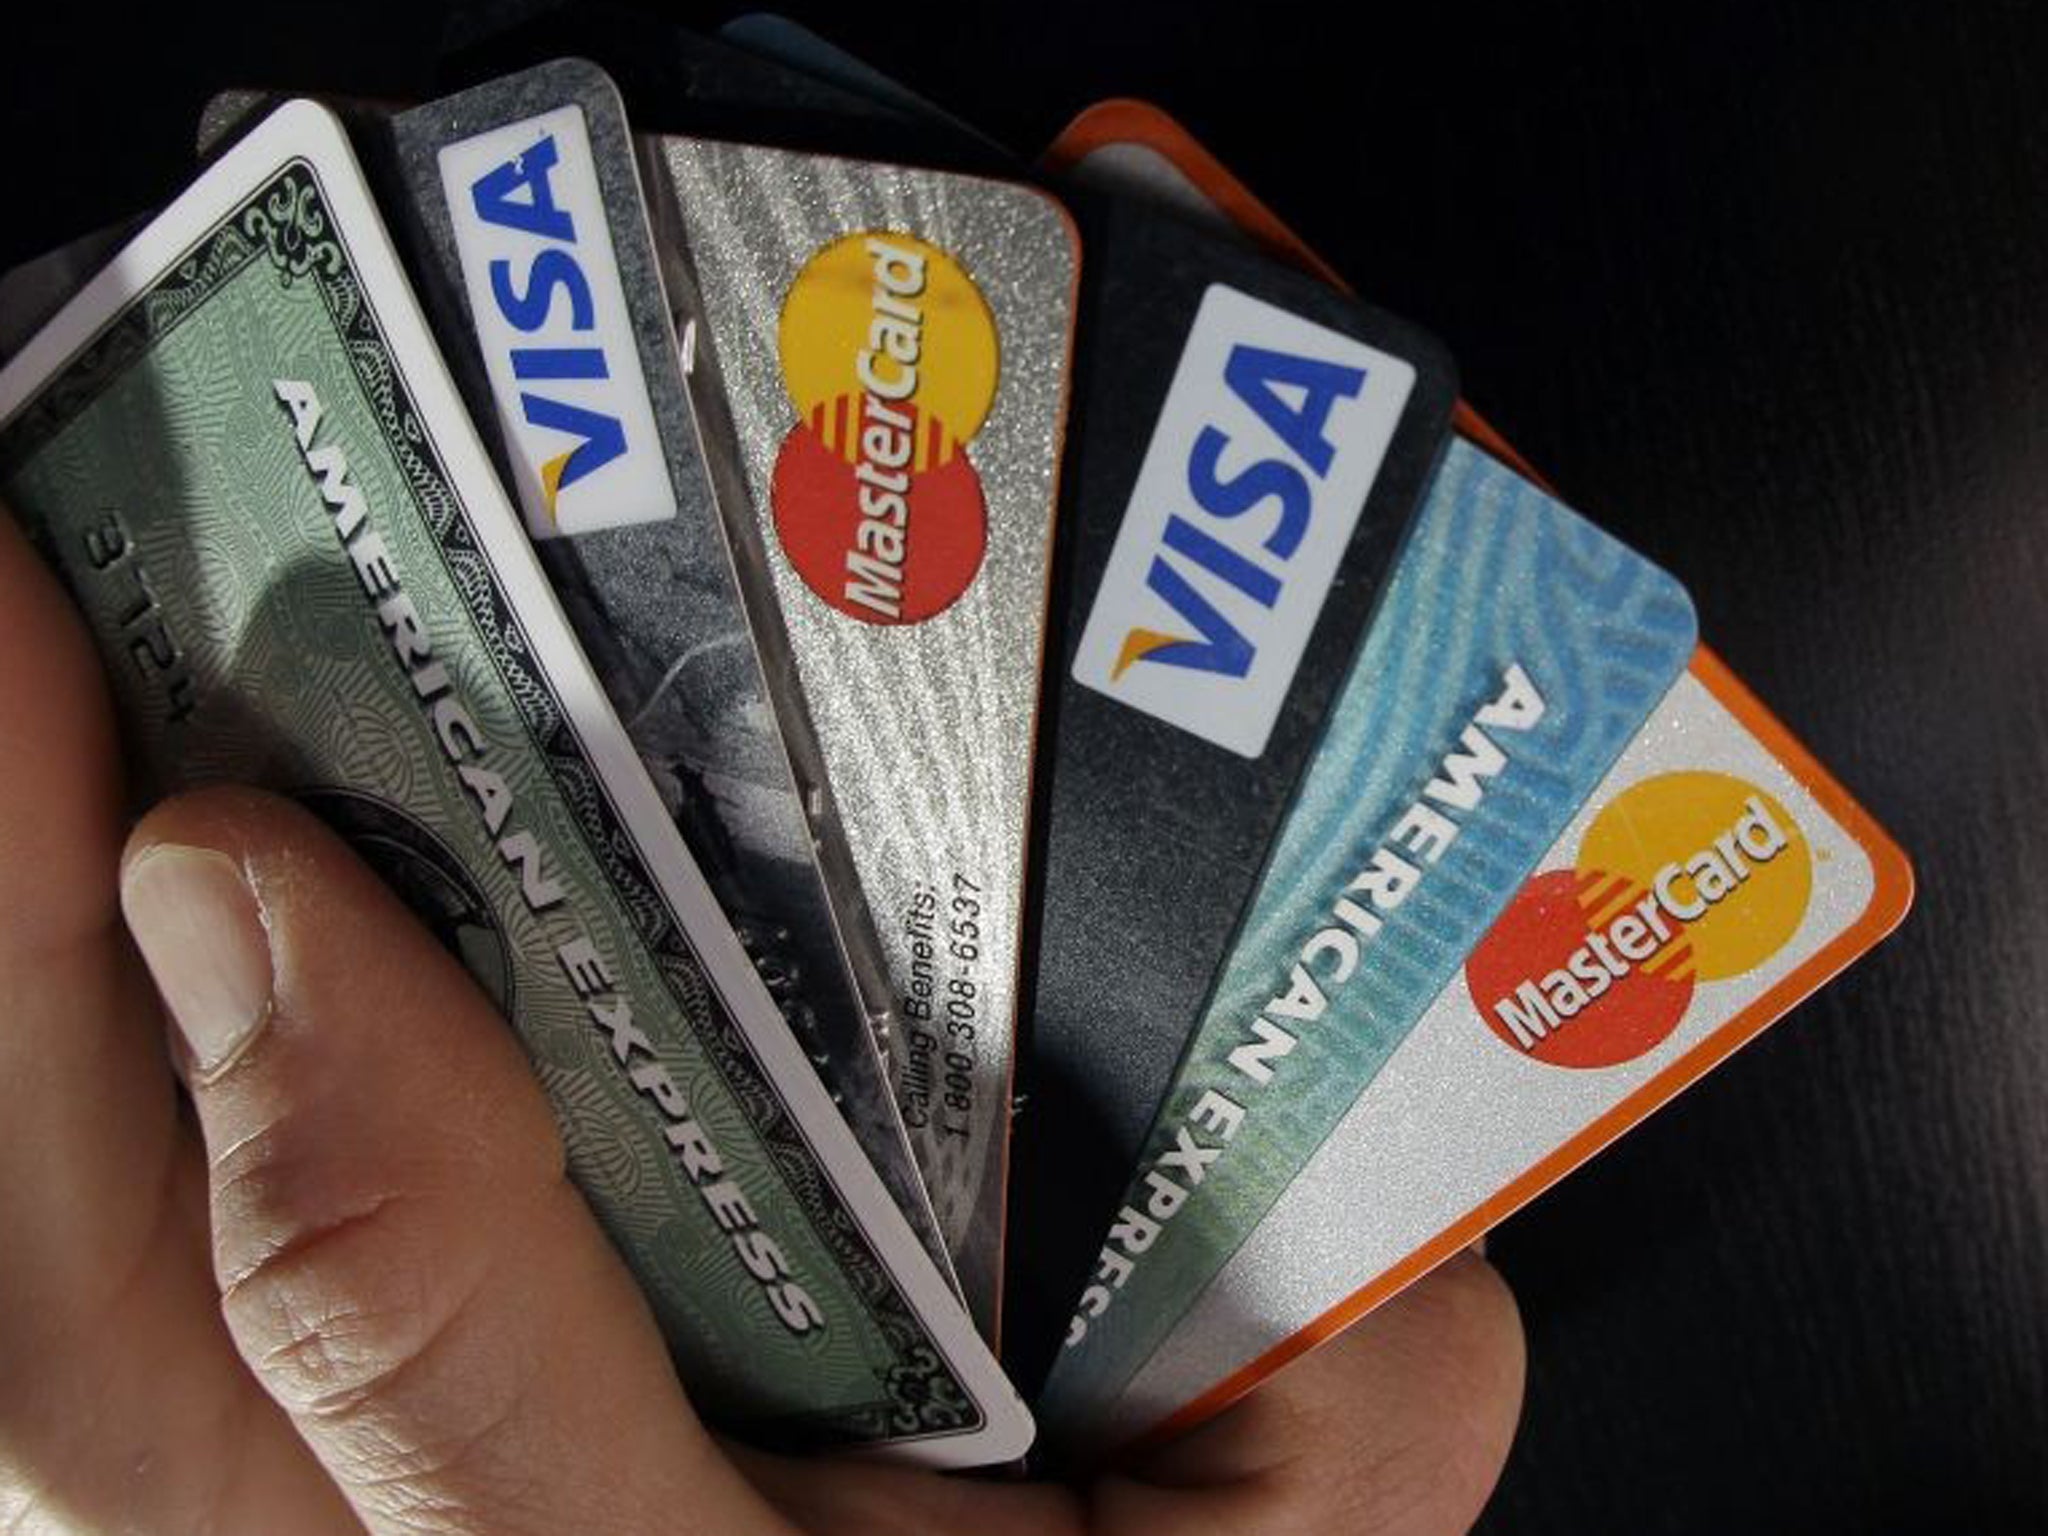 The 0 per cent introductory deals that credit cards offer are one of the most odious tricks